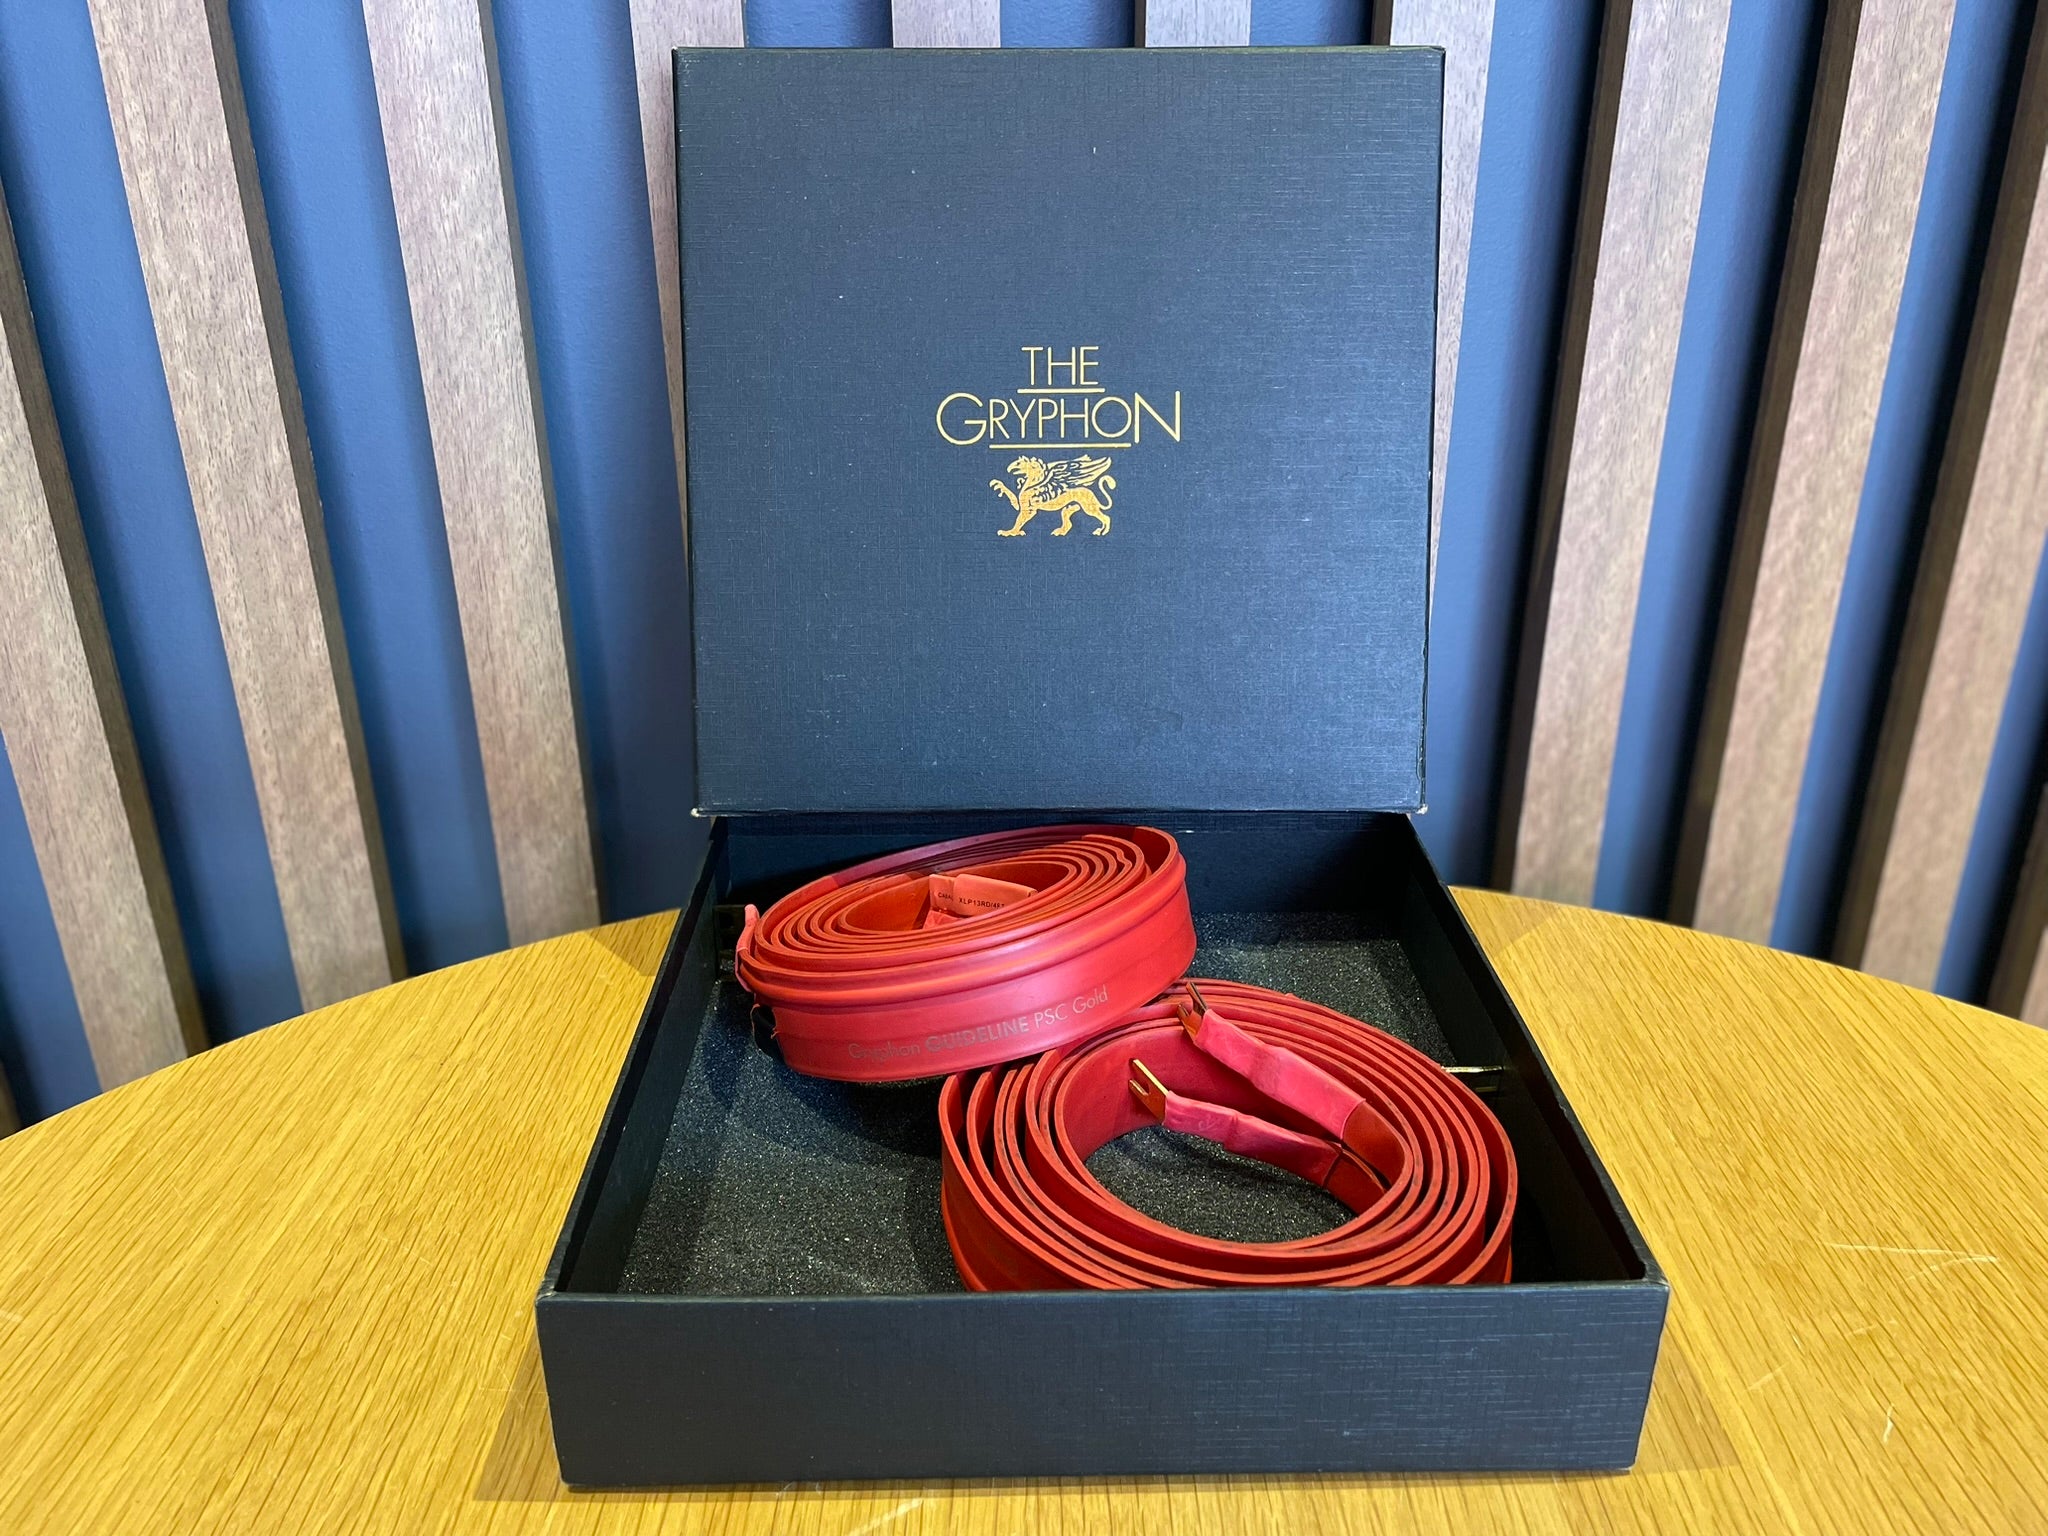 Gryphon Guideline PSC Gold Speaker Cable 3m - As Traded